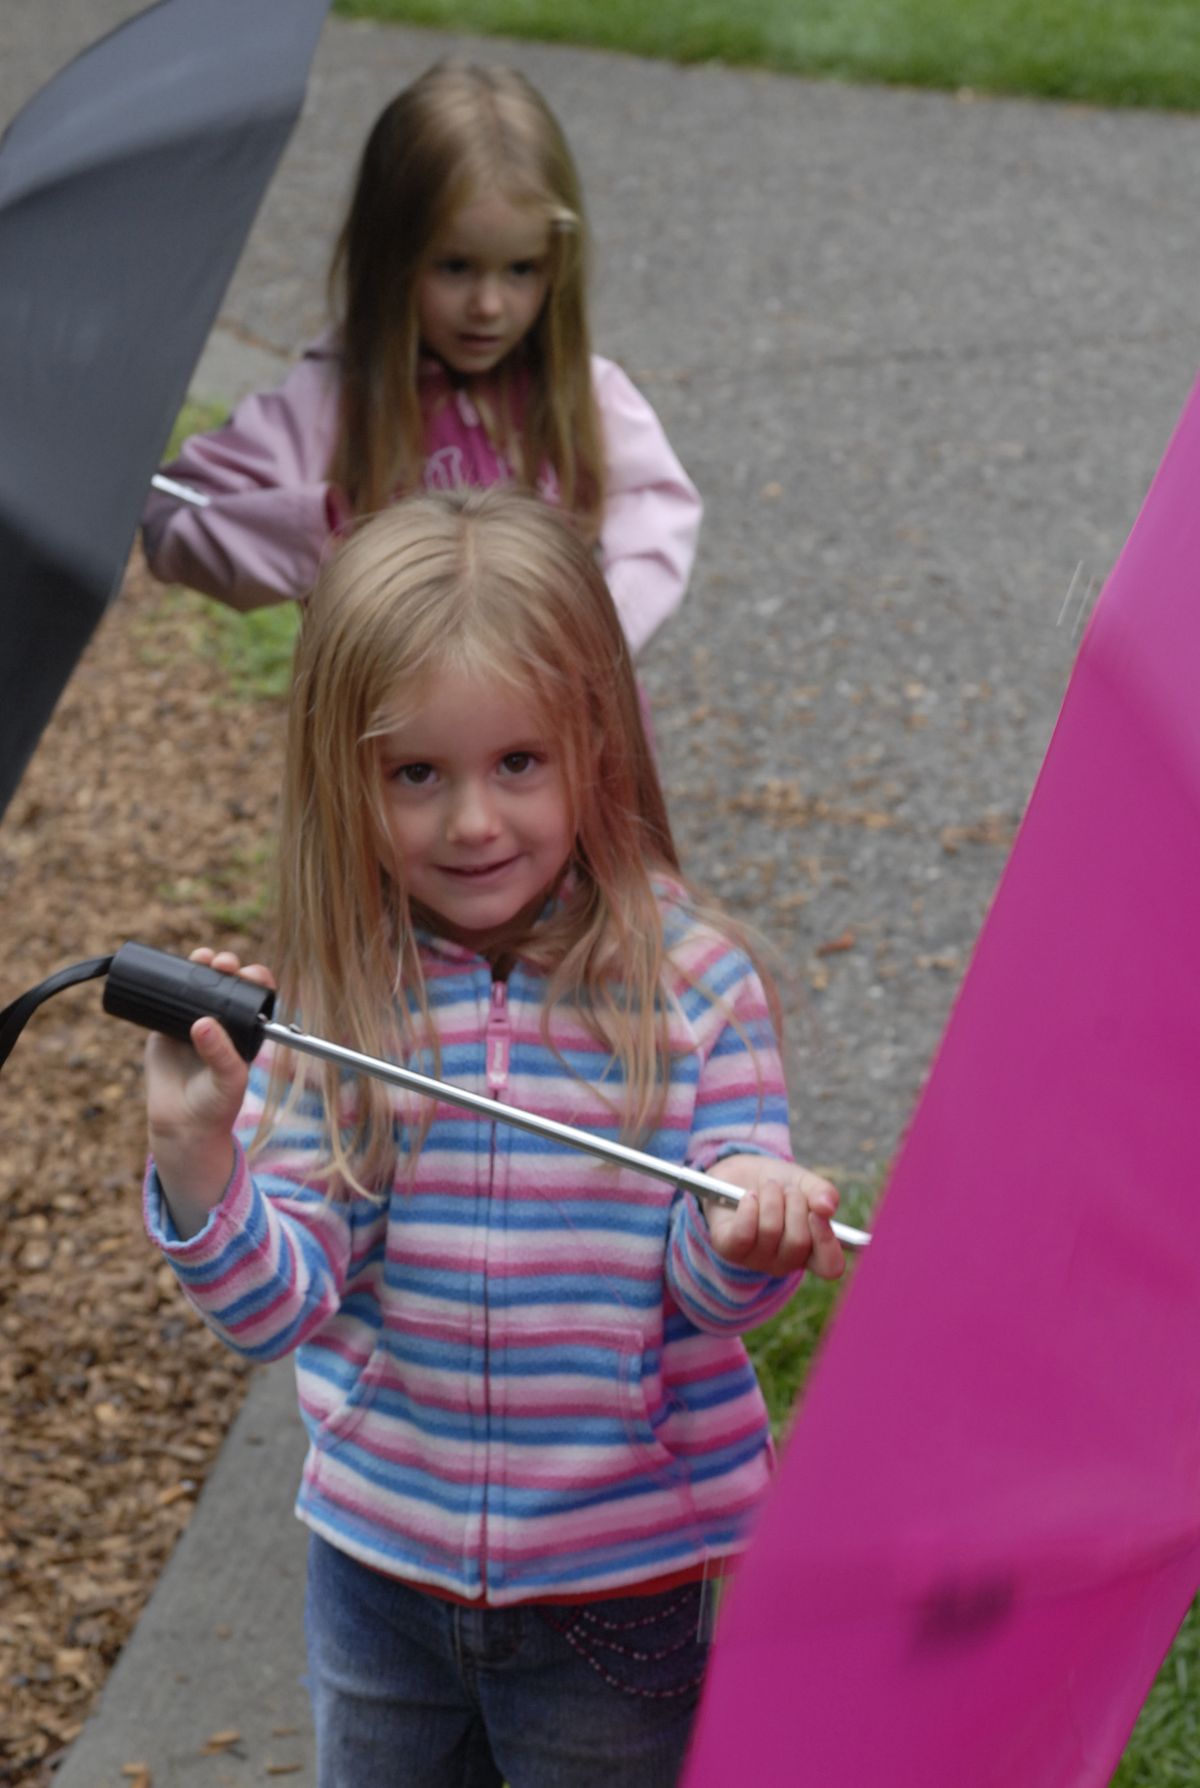 Sheltered from the rain, 3-year-old Paige Larson, front, and twin sister Elaina Larson play  at Manito Park. (Kate Clark / The Spokesman-Review)